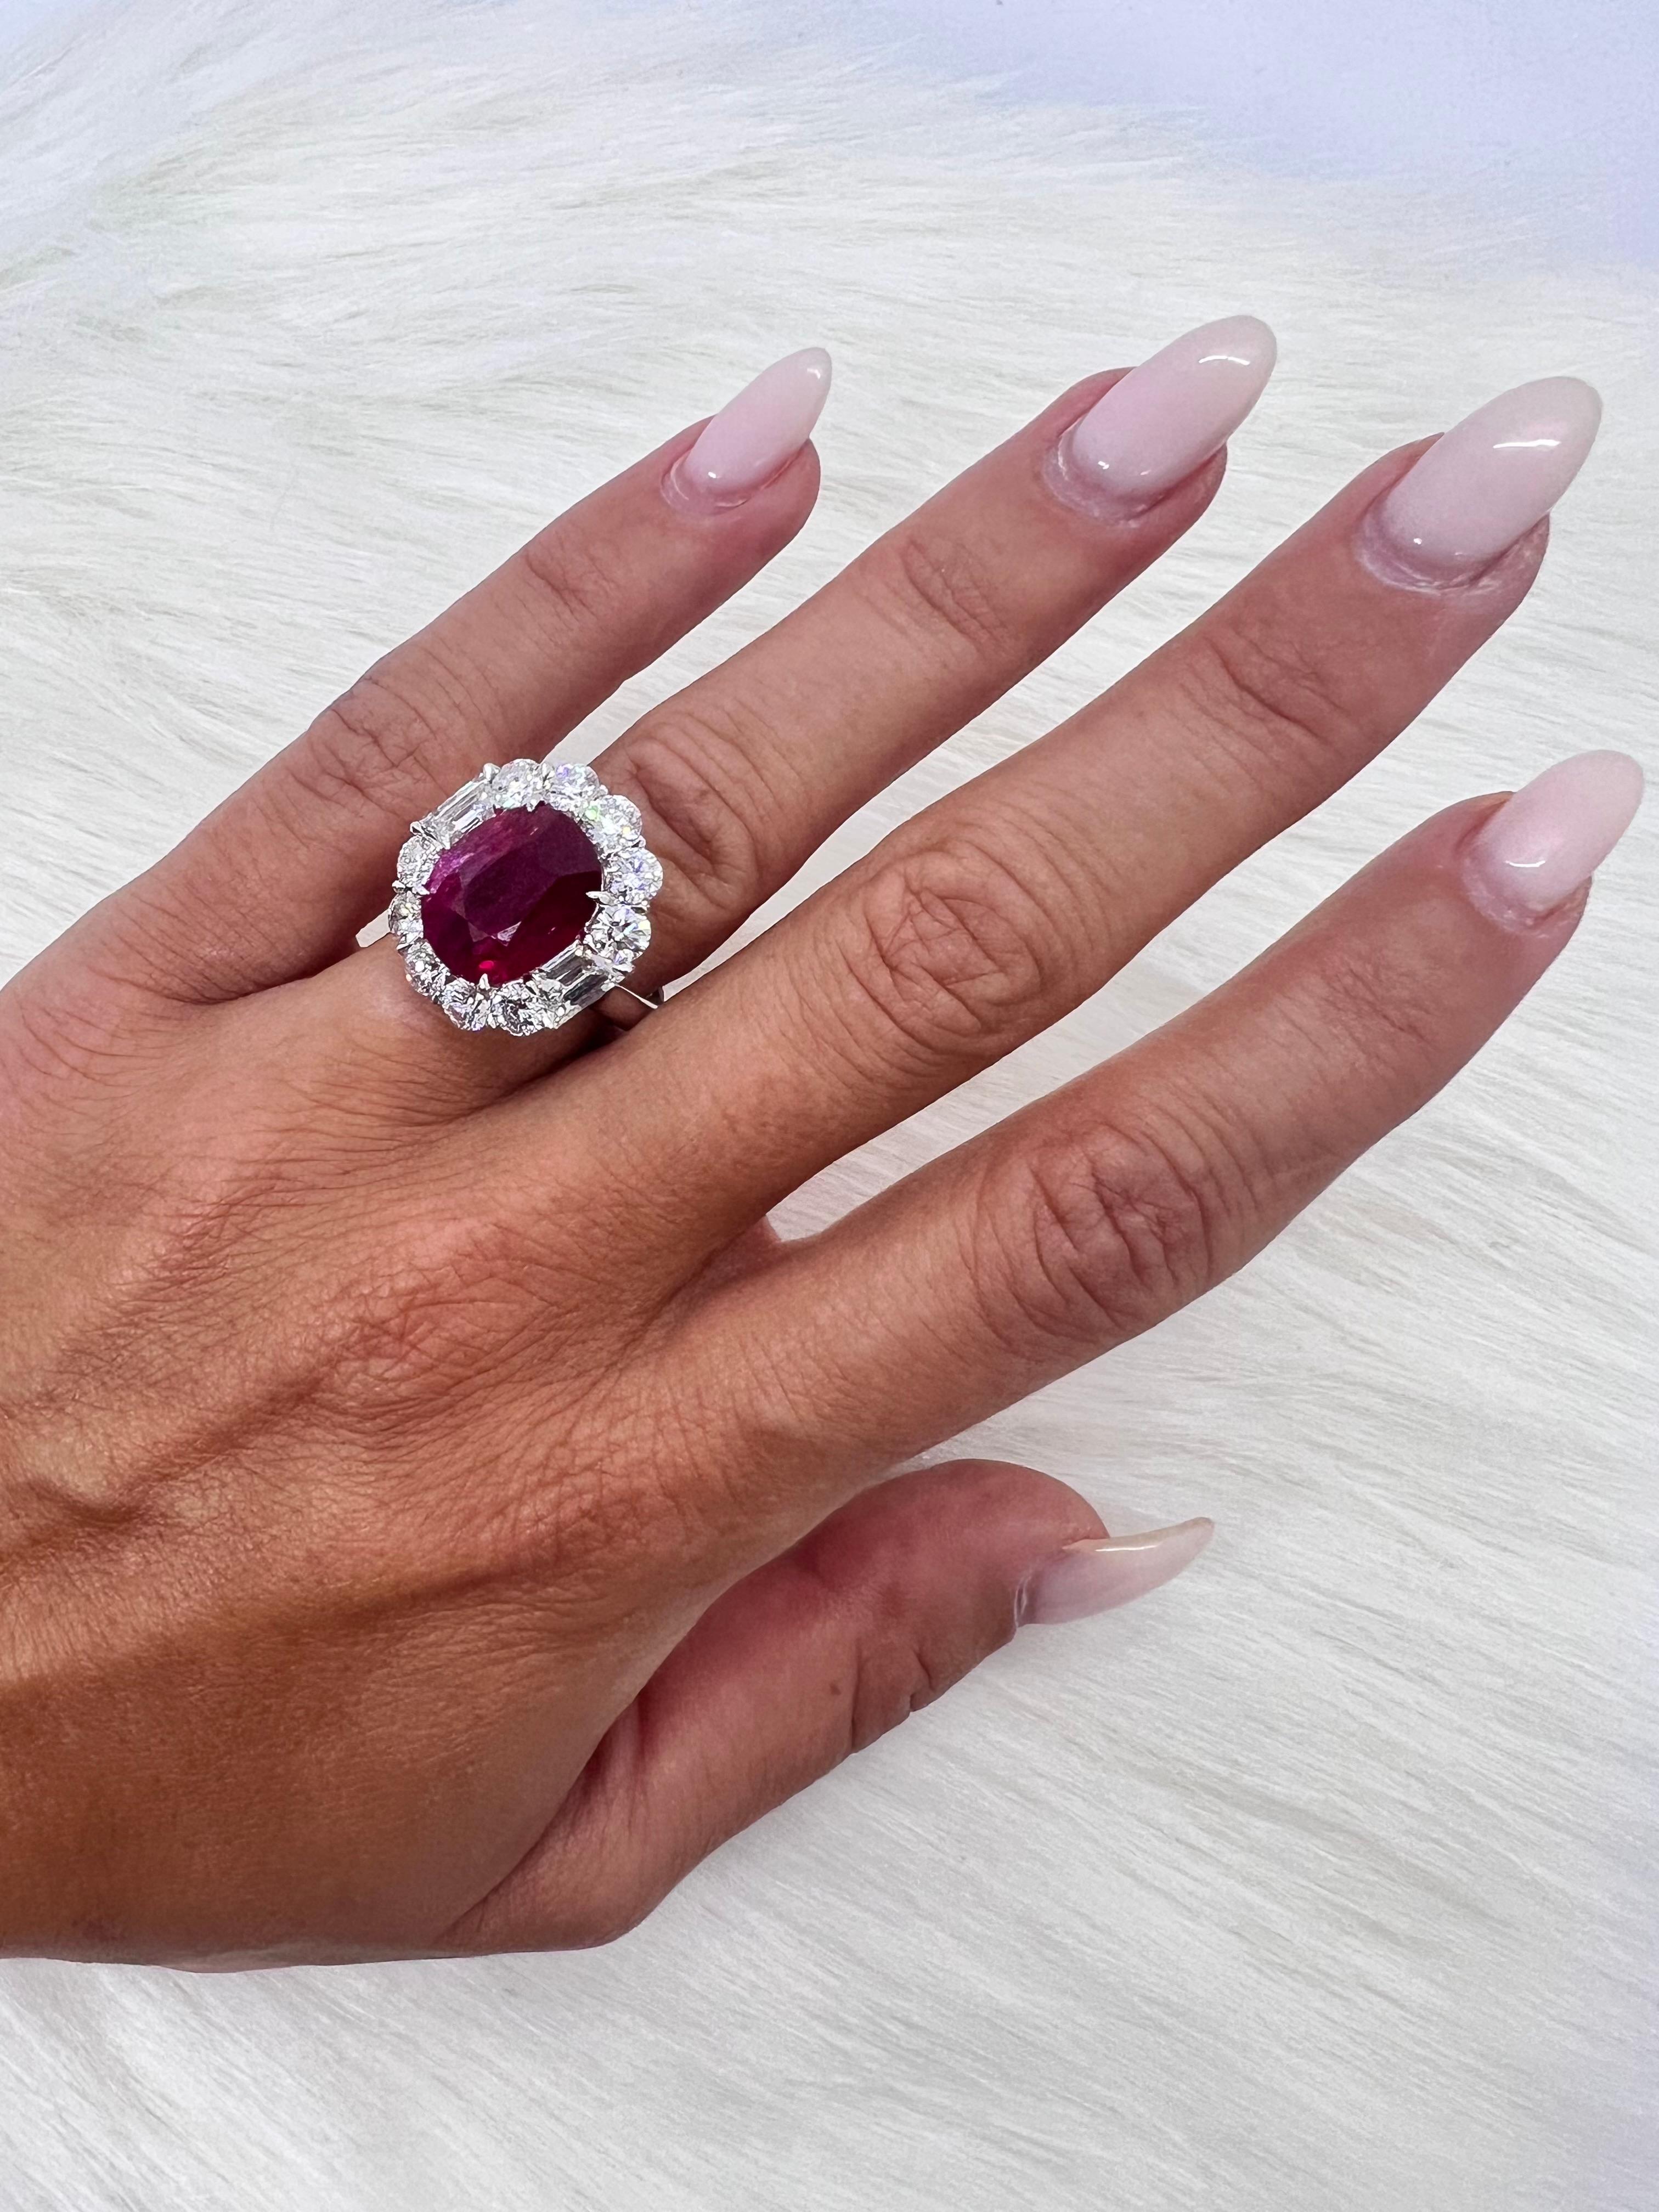 Oval Cut Sophia D. 6.06 Carat Ruby and Diamond Platinum Ring For Sale